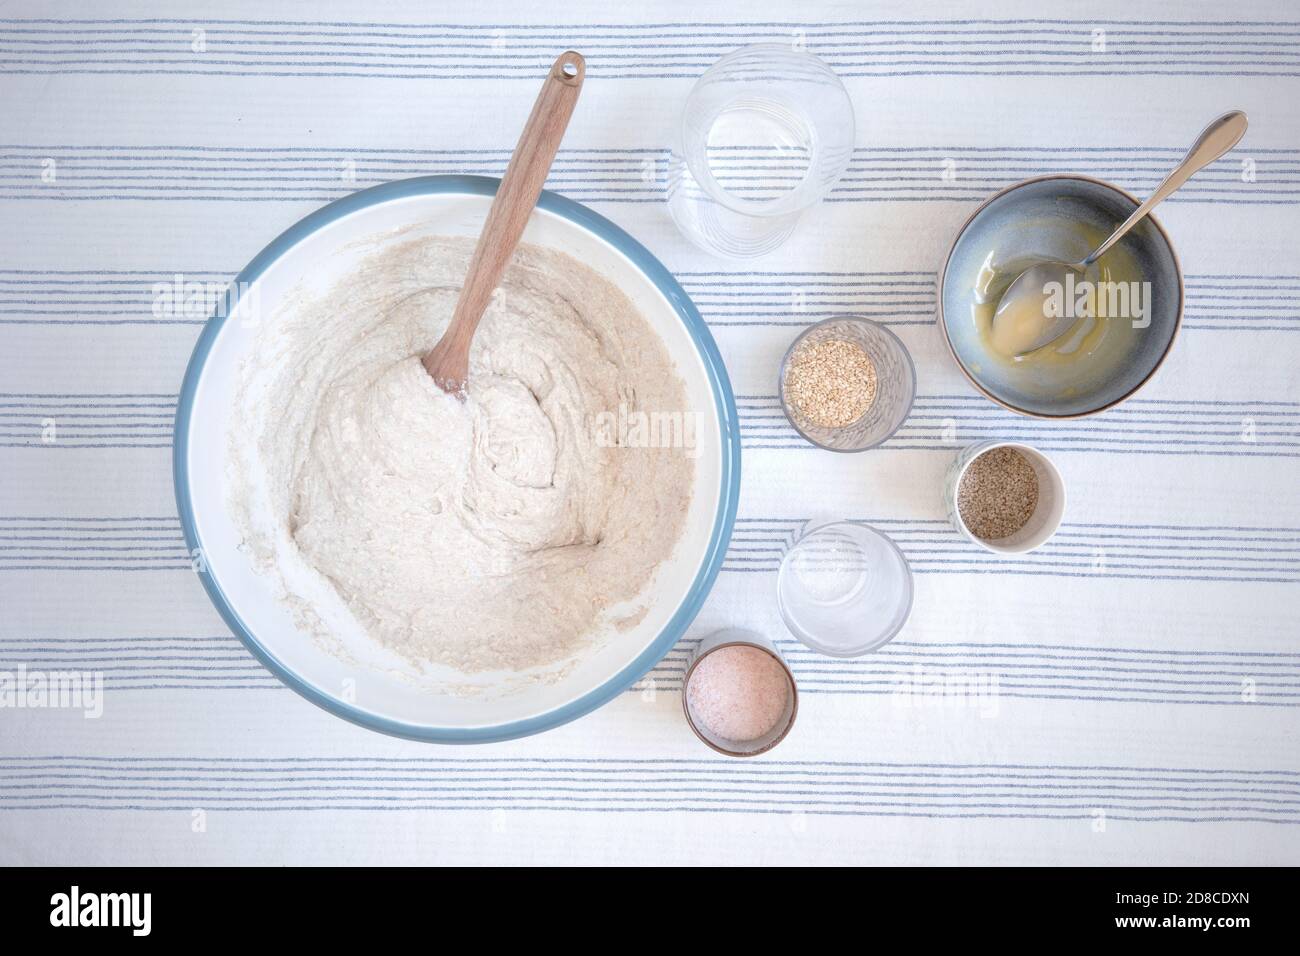 https://c8.alamy.com/comp/2D8CDXN/ingredients-and-mixing-bowl-with-dough-inside-and-wooden-spoon-kitchen-table-with-tablecloth-with-stripes-preparing-homemade-bread-in-rustic-style-2D8CDXN.jpg